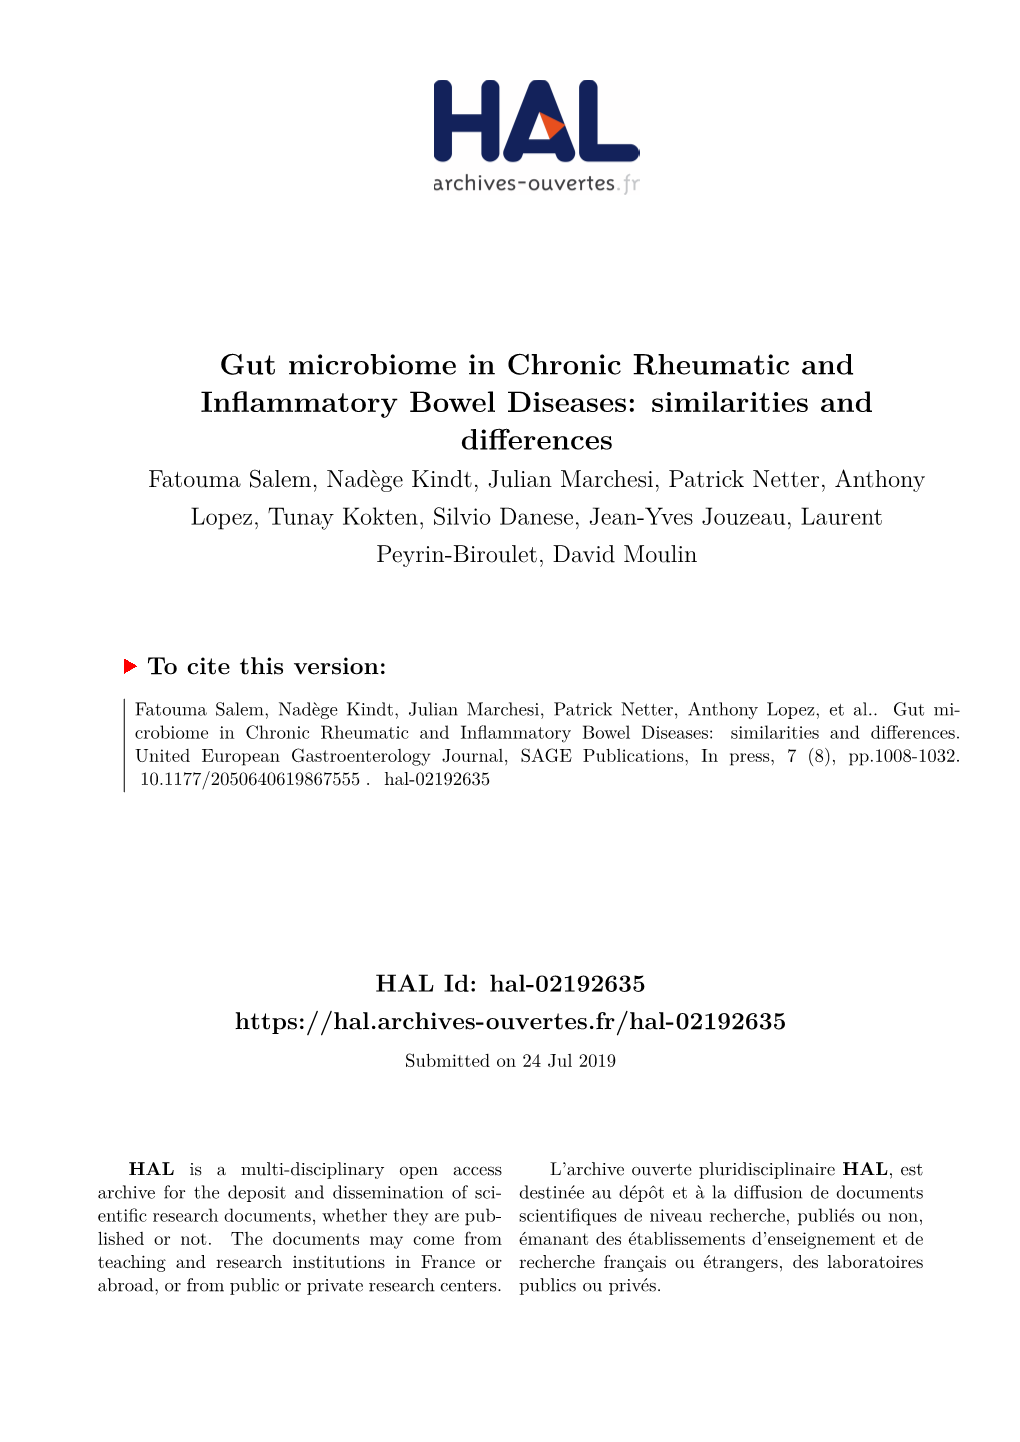 Gut Microbiome in Chronic Rheumatic and Inflammatory Bowel Diseases